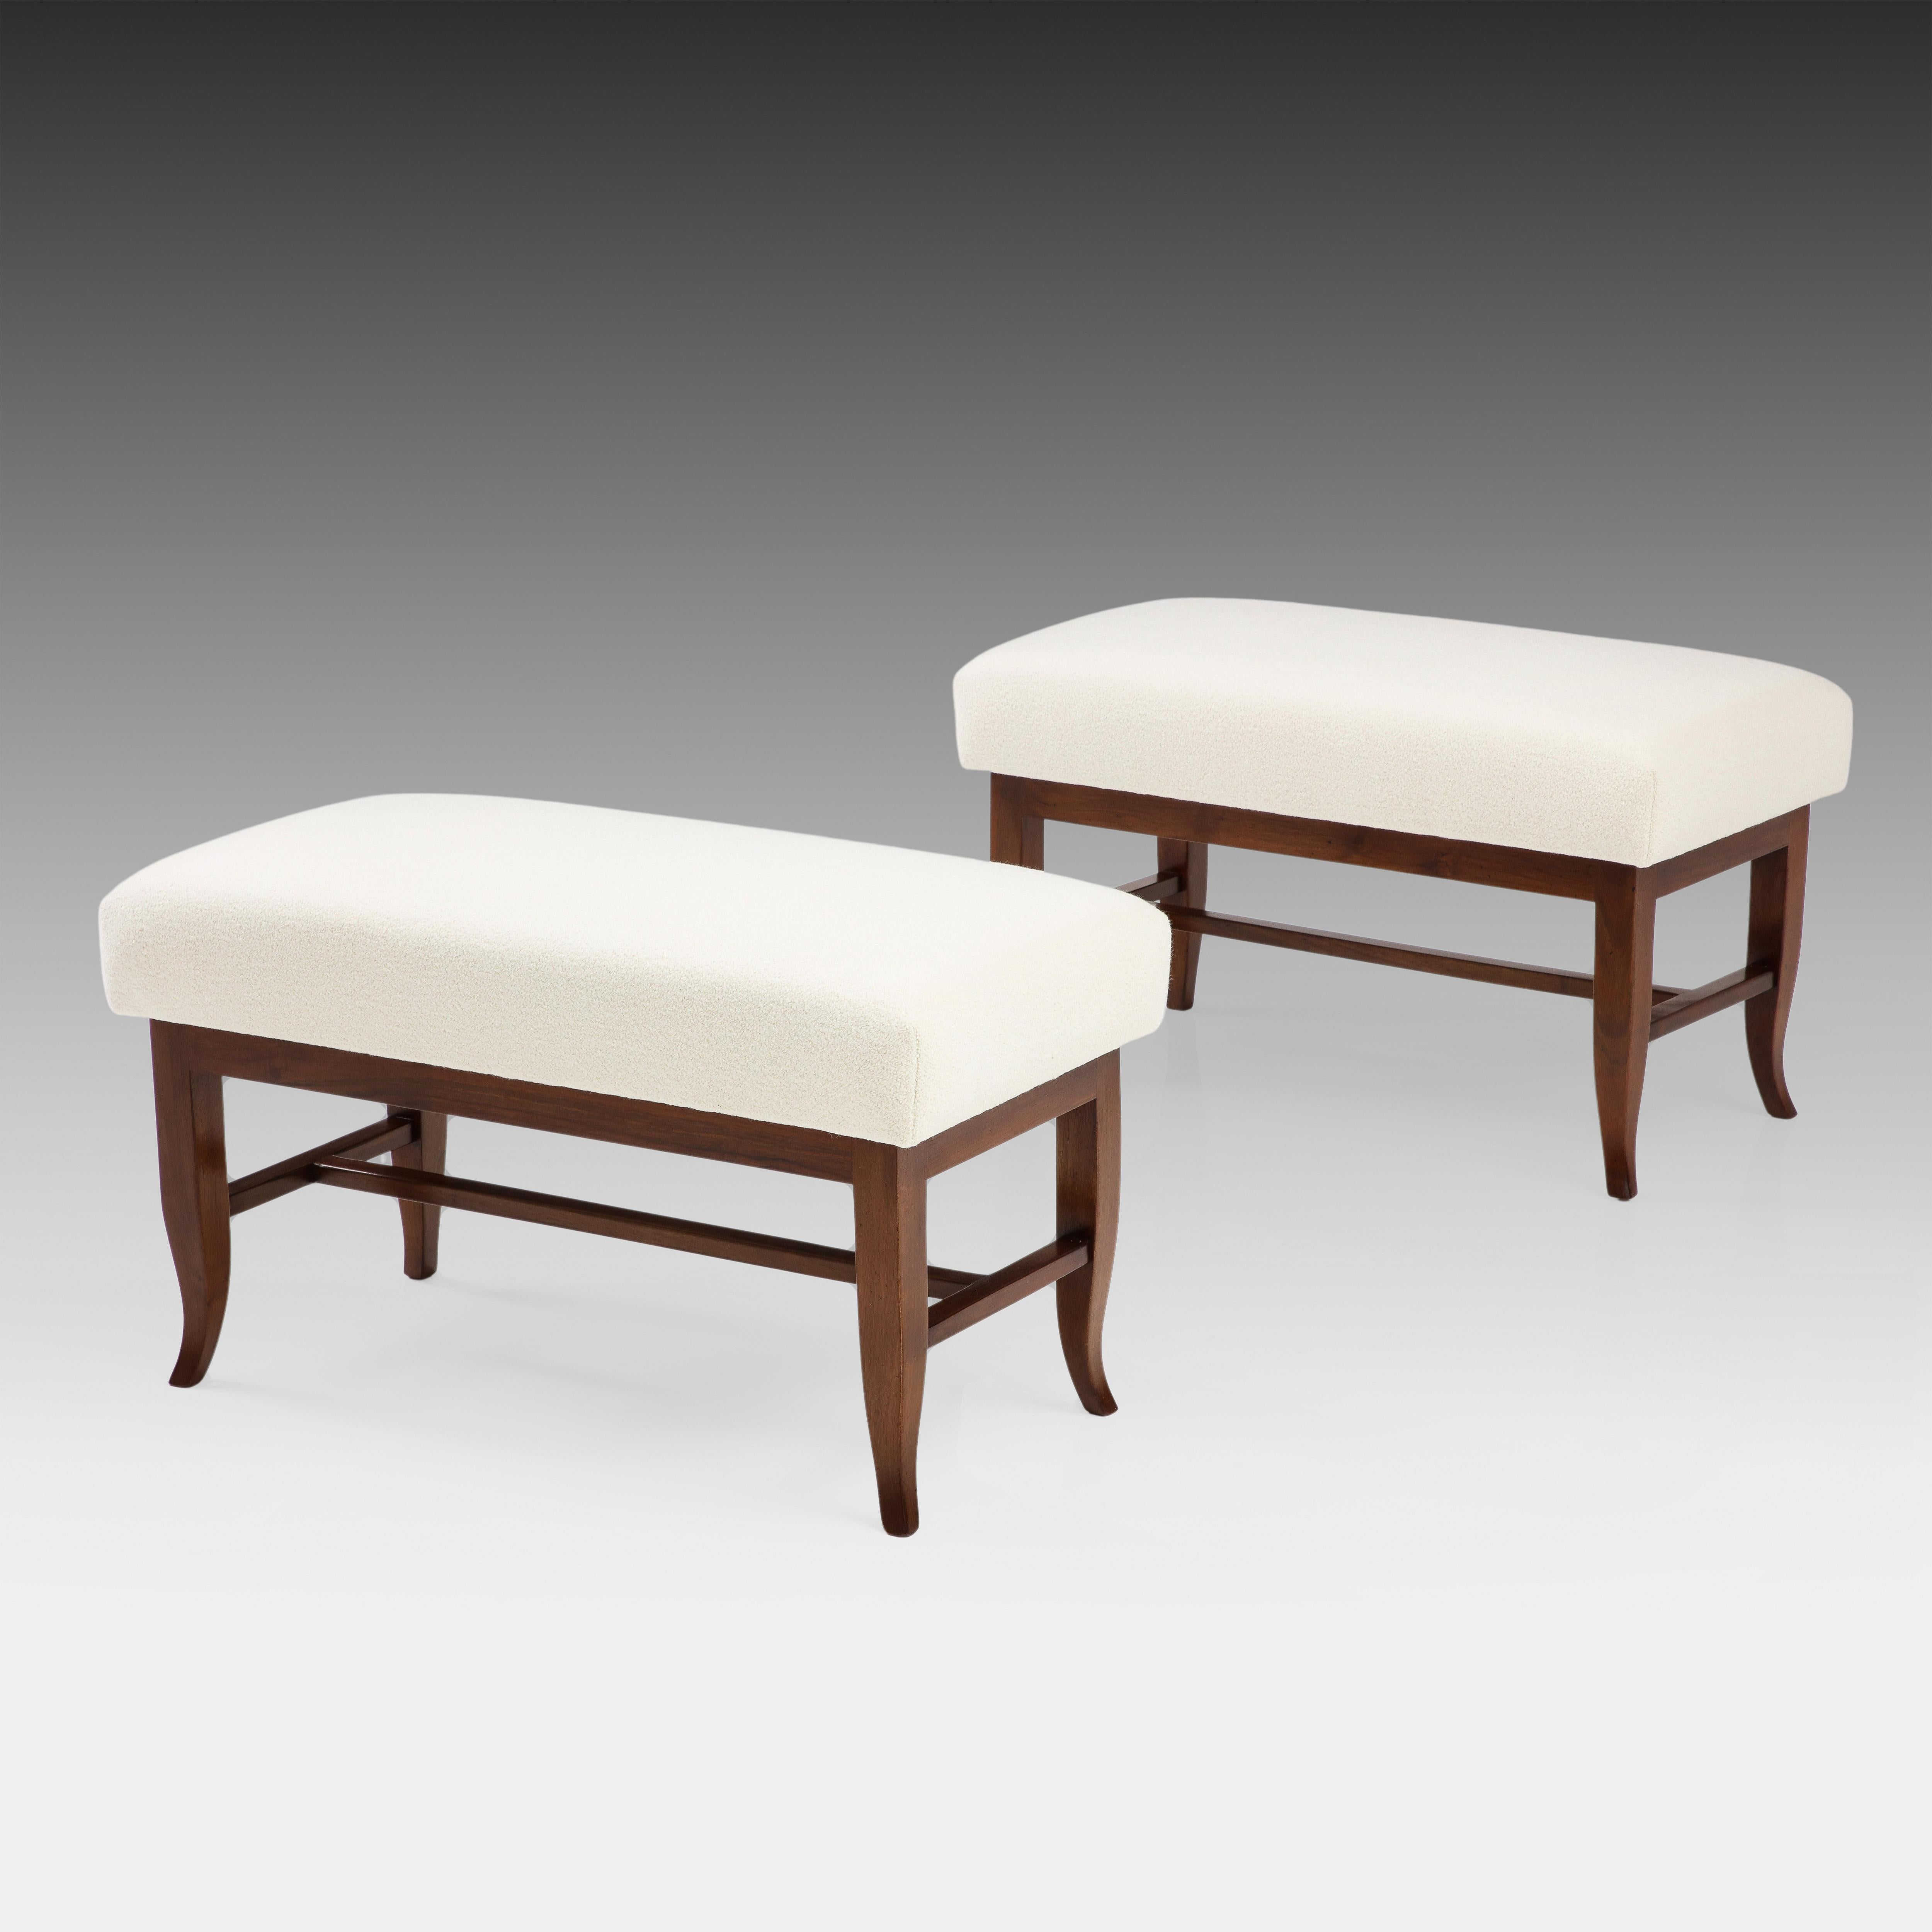 Mid-Century Modern Gio Ponti Rare Pair of Benches in Walnut and Ivory Bouclé, Italy, 1930s For Sale